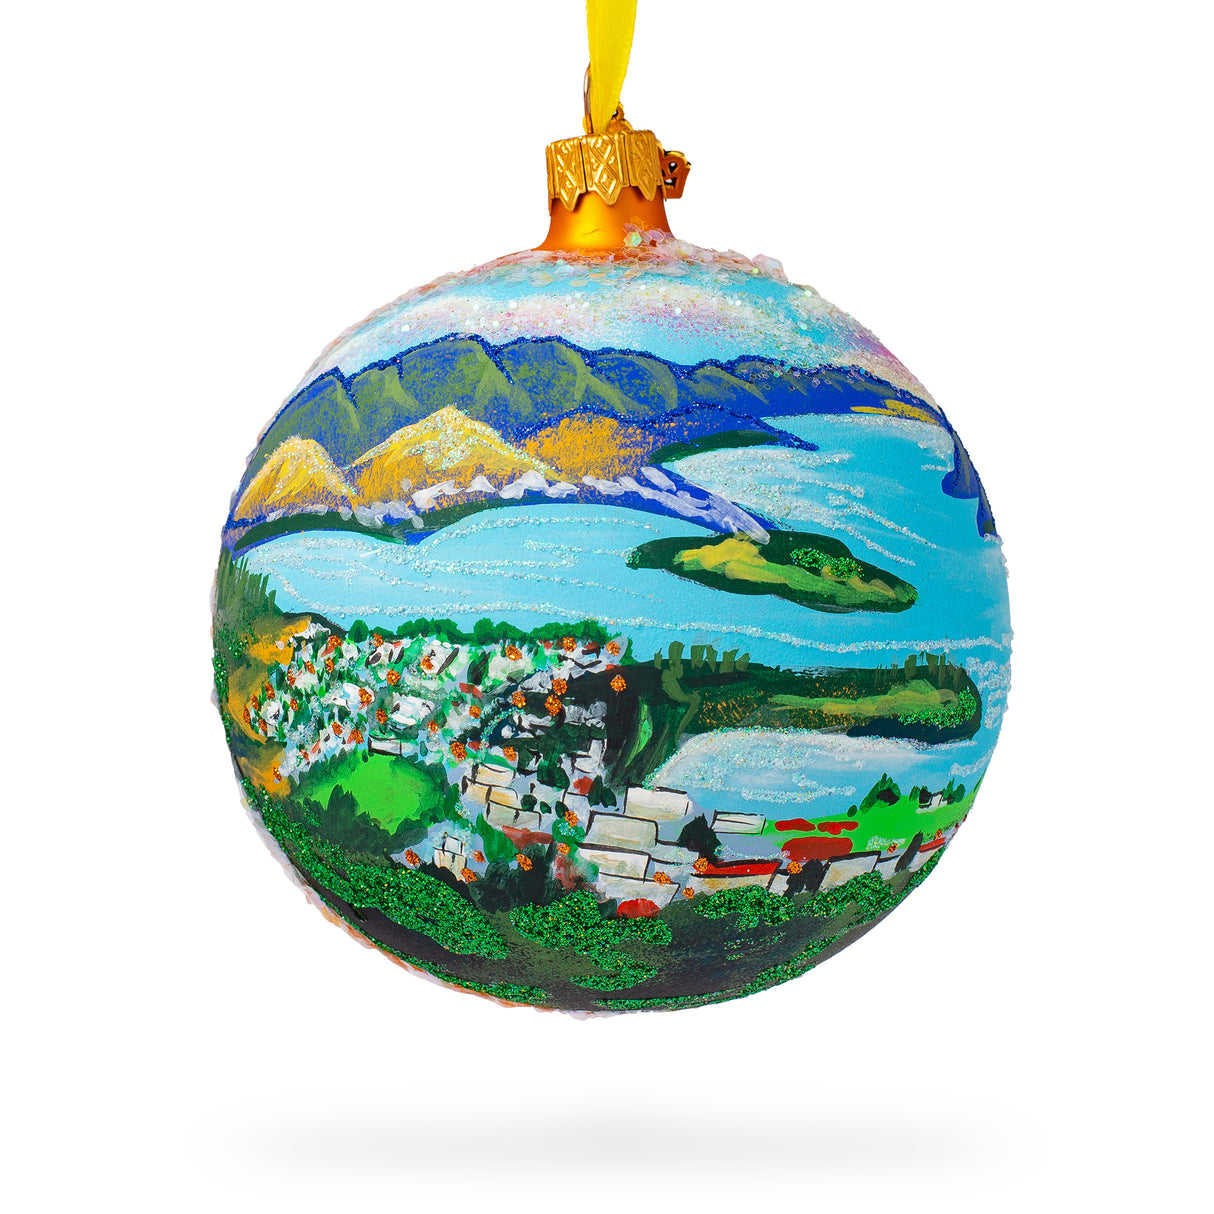 Glass Queenstown, New Zealand Glass Ball Christmas Ornament 4 Inches in Blue color Round